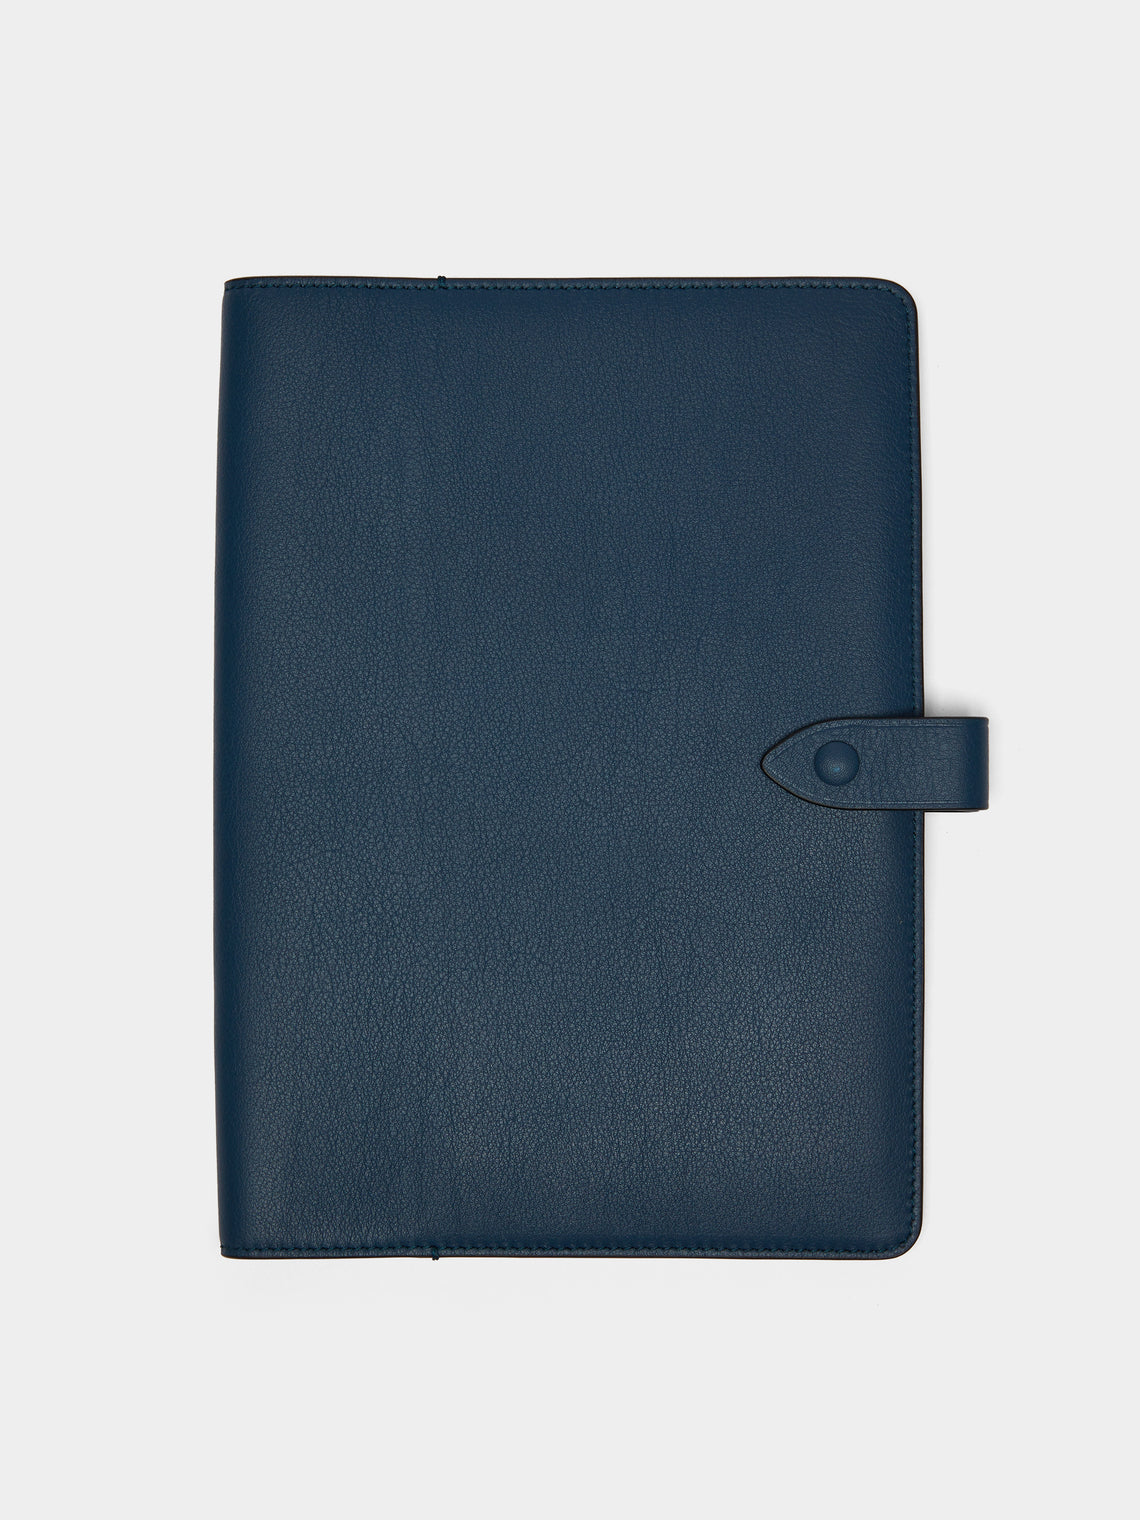 Métier - Leather A5 Notebook Cover - Blue - ABASK - 